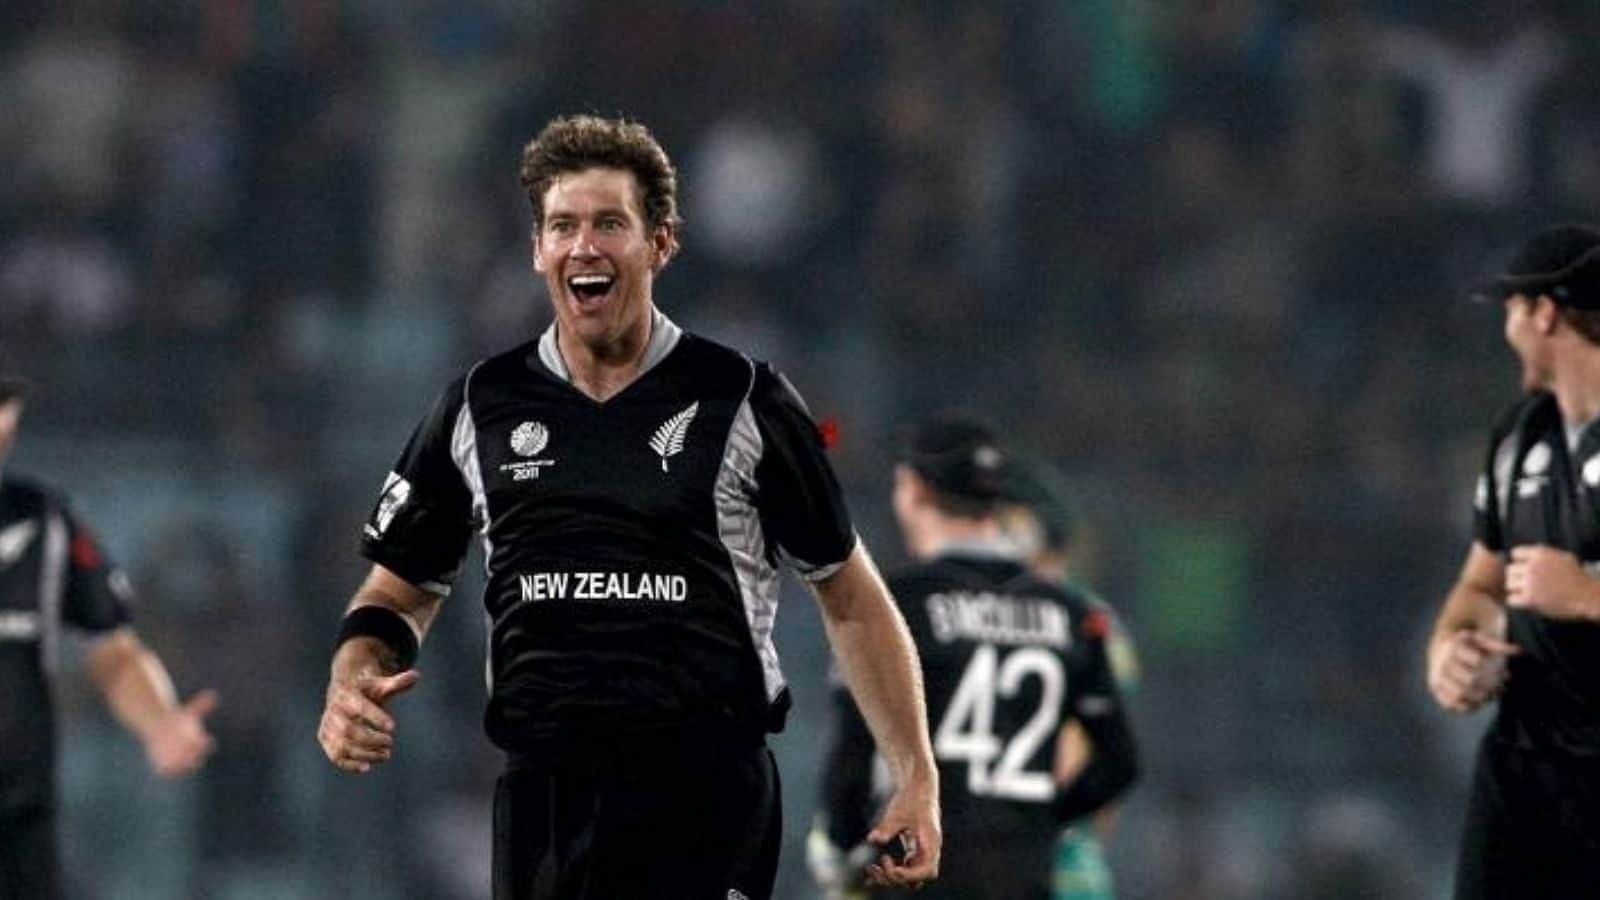 Jacob Oram was in some form for the Black Caps in the 2011 Cricket World Cup.